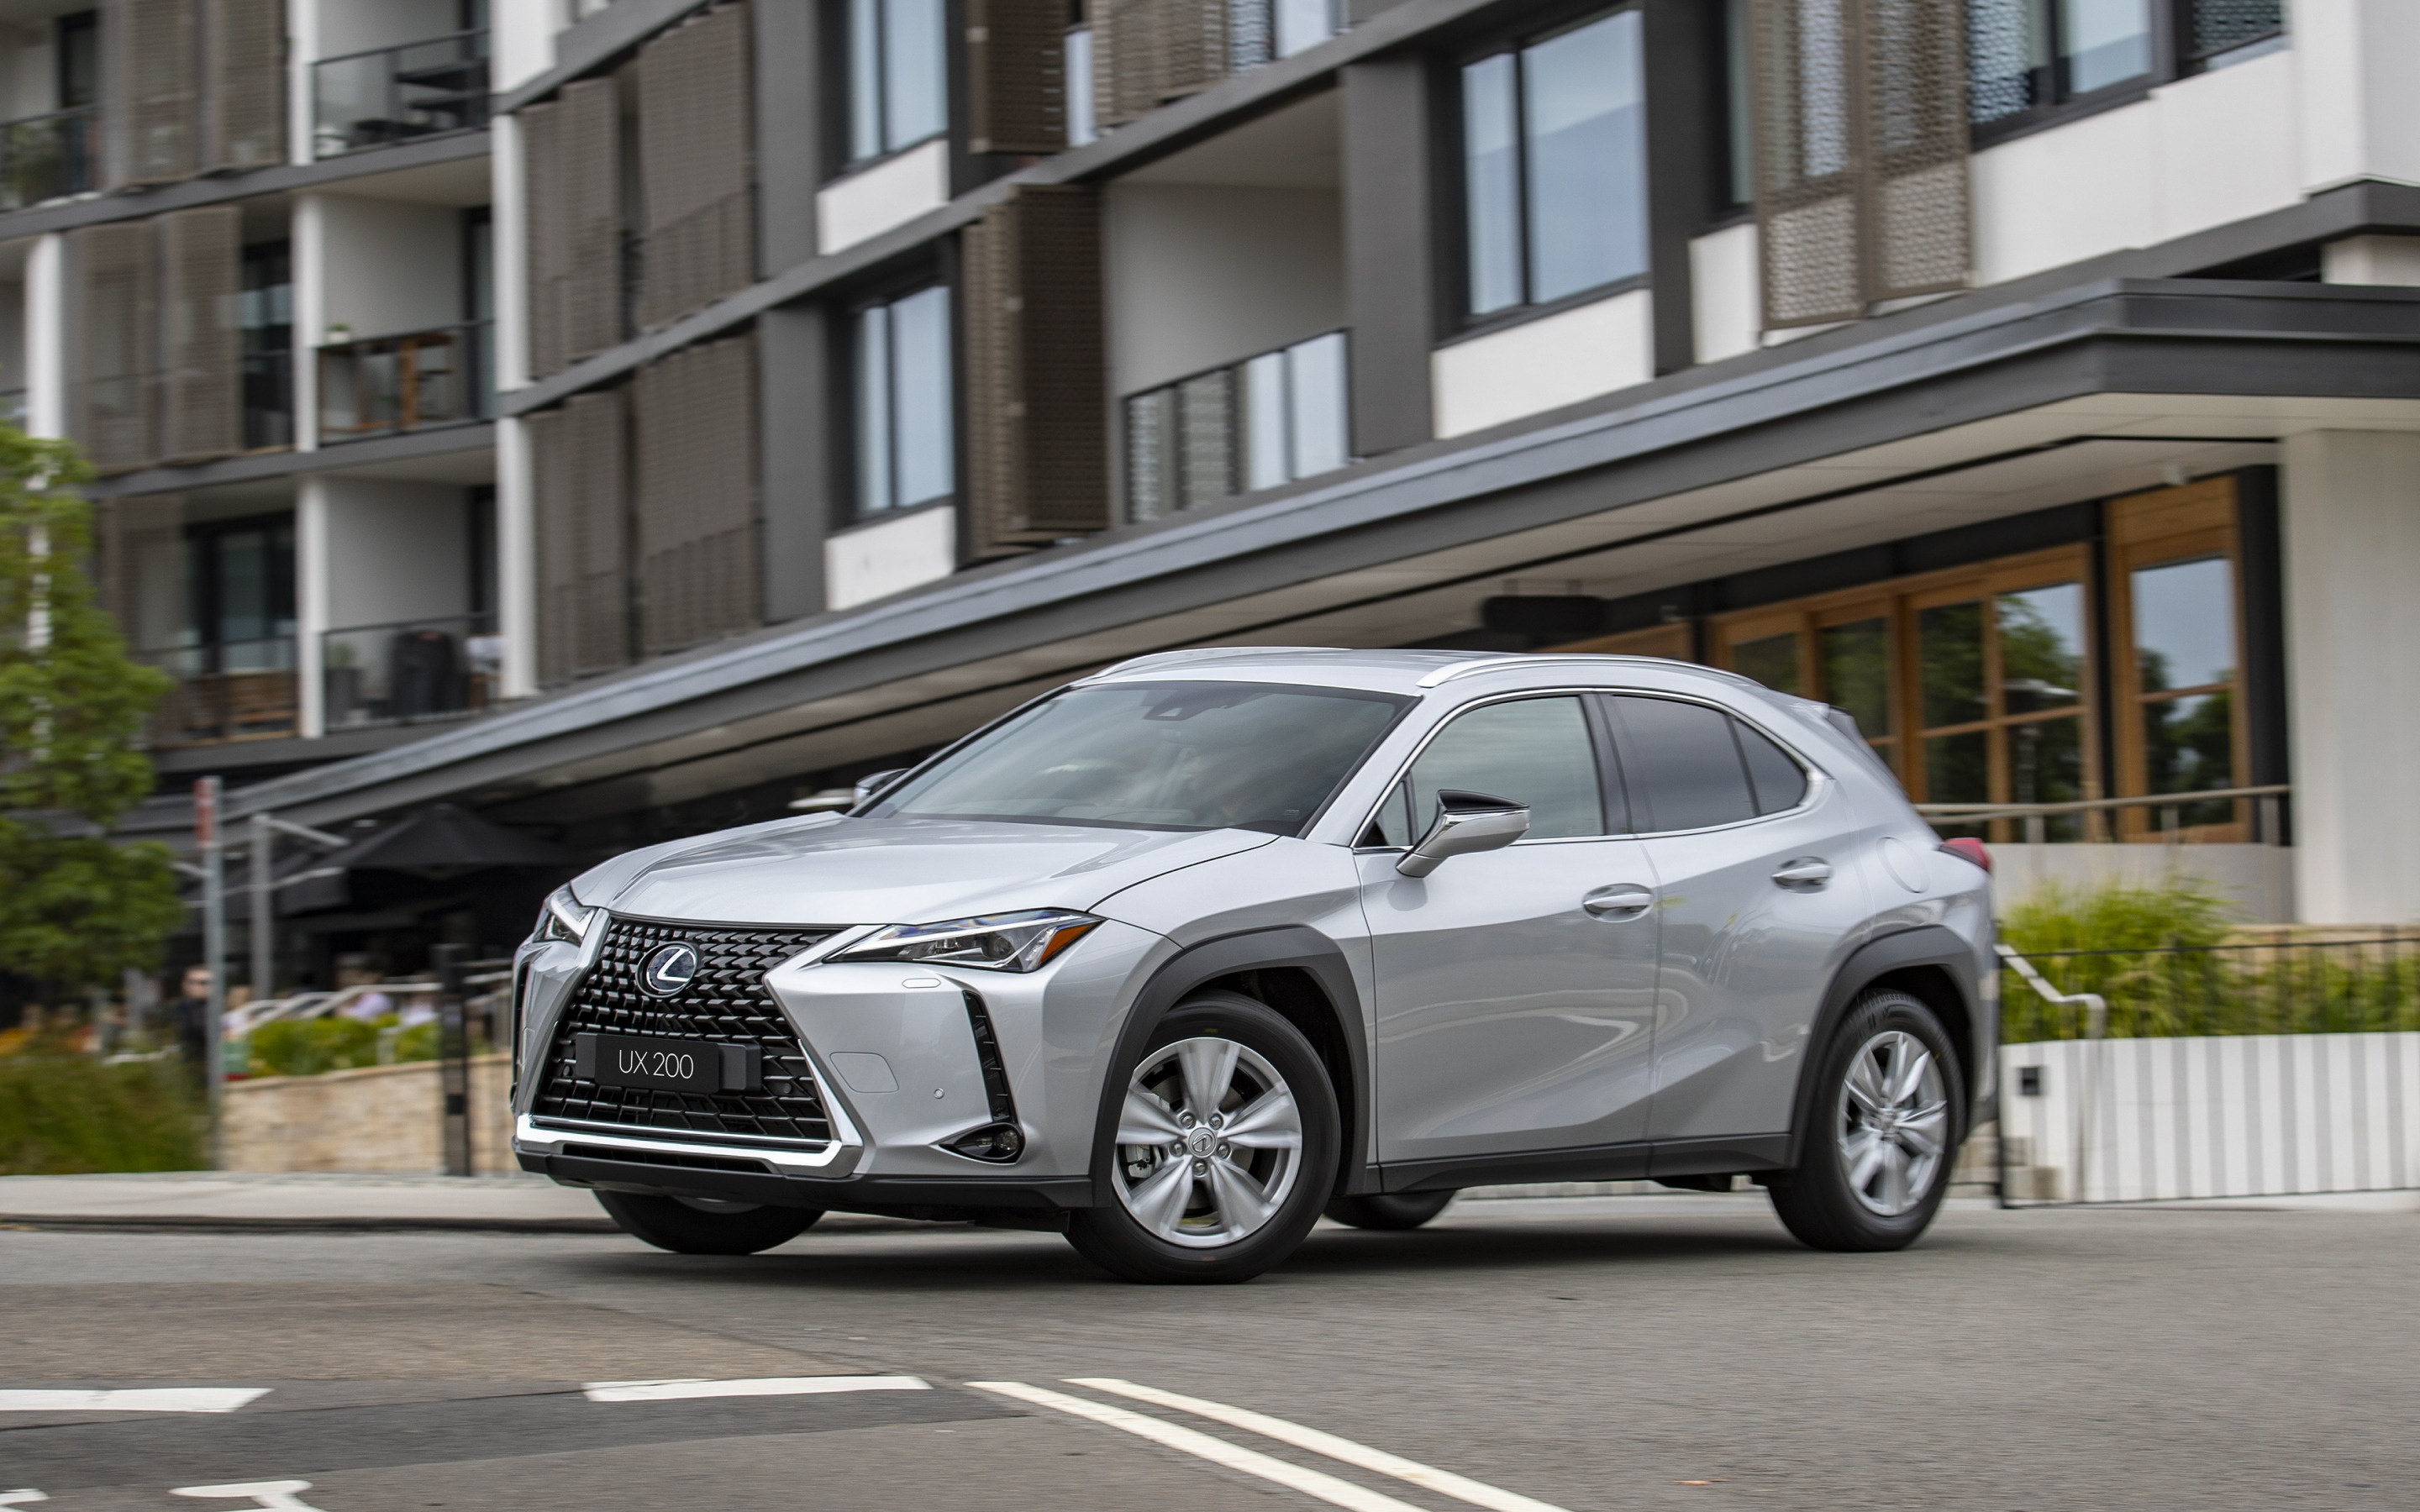 Lexus UX, Futuristic crossover, Stunning silver exterior, High-quality wallpapers, 2880x1800 HD Desktop